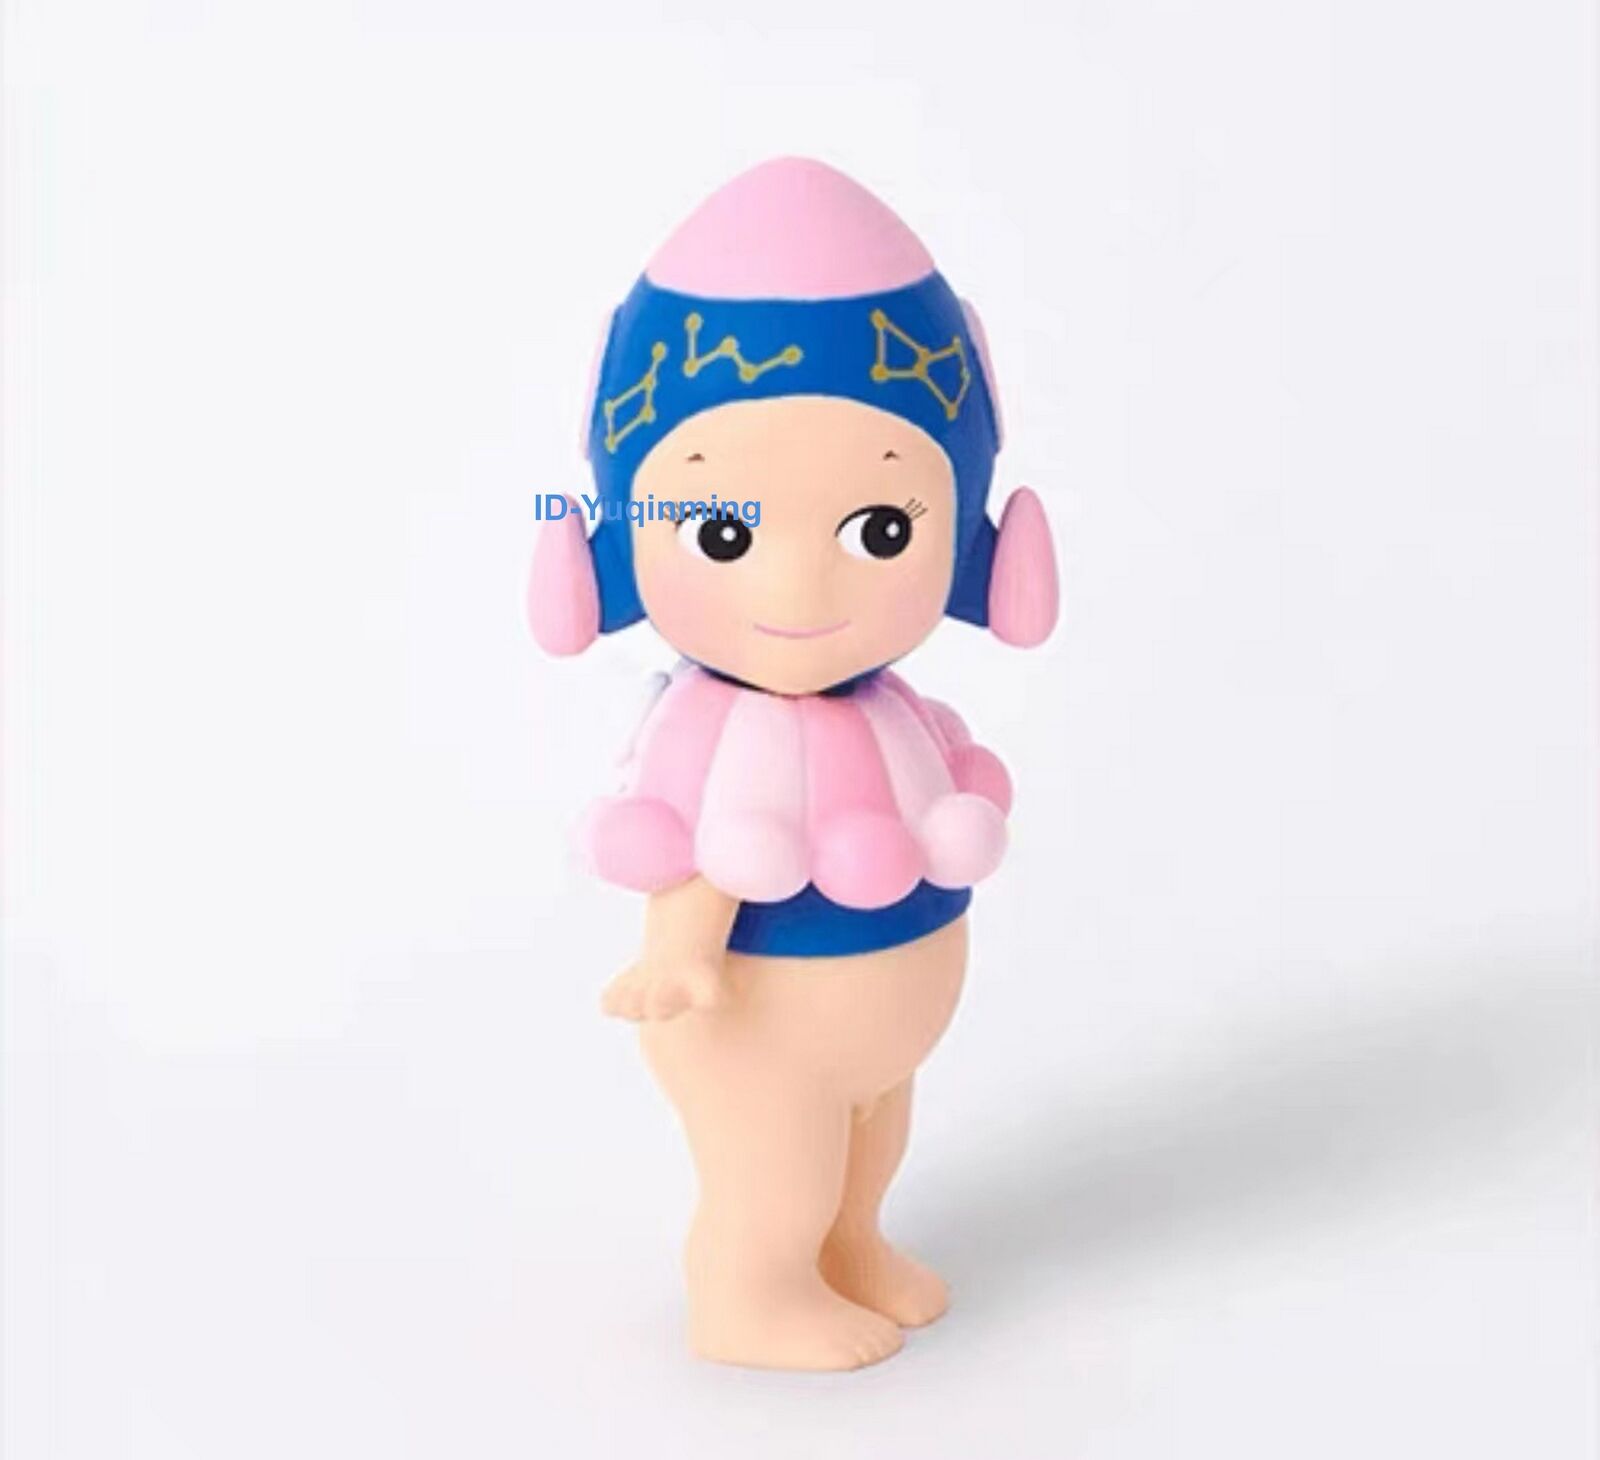 Sonny Angel in Space Adventure 2020 Confirmed Blind Box Figure TOY HOT